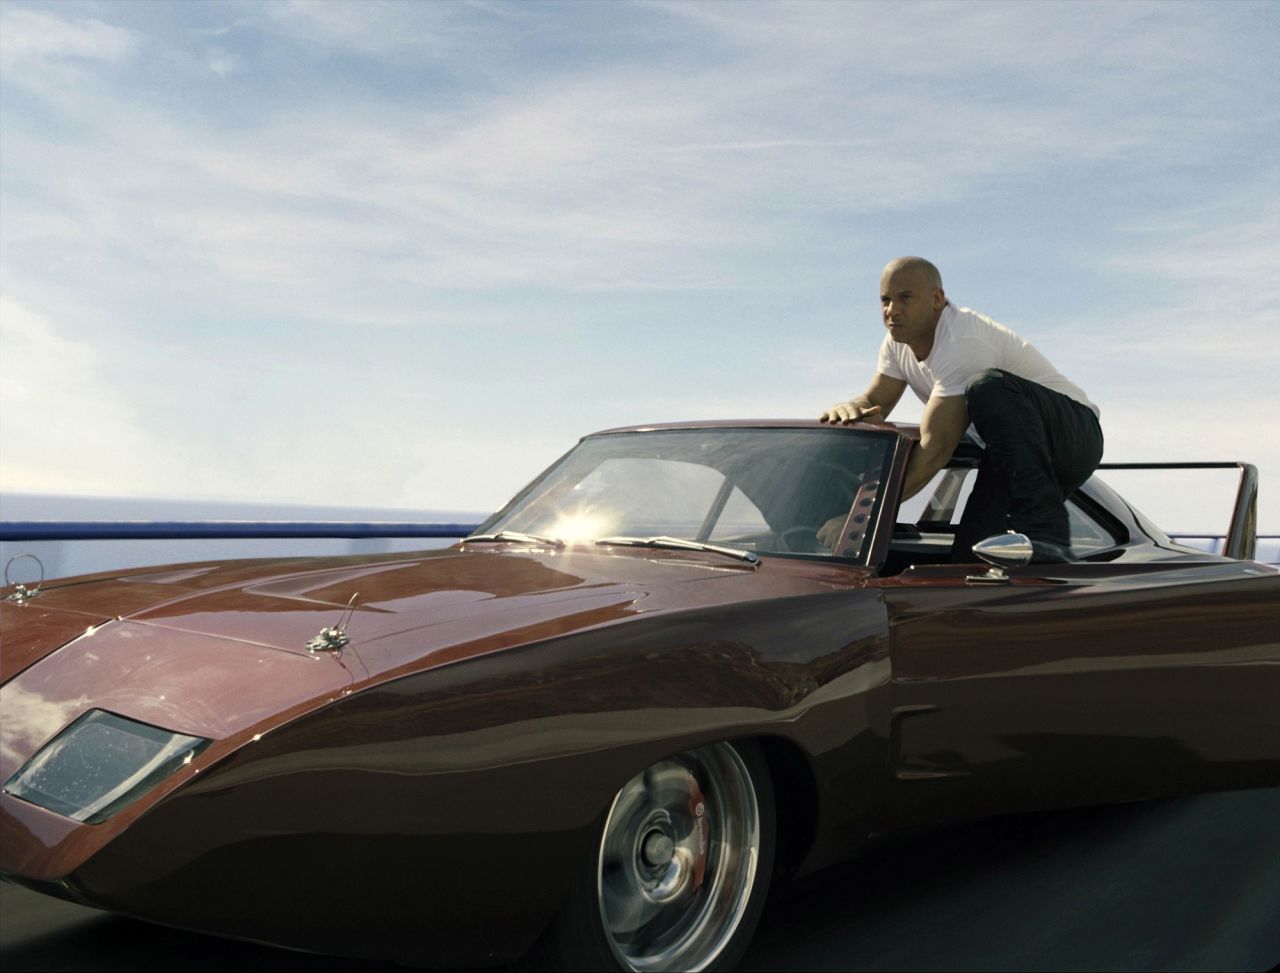 "Fast and Furious 6," starring Vin Diesel, was one of the biggest sleeper hits of the summer, making $230 million domestically and a staggering $548 million overseas. Even critics liked it -- it received 69% approval on the Tomatometer.